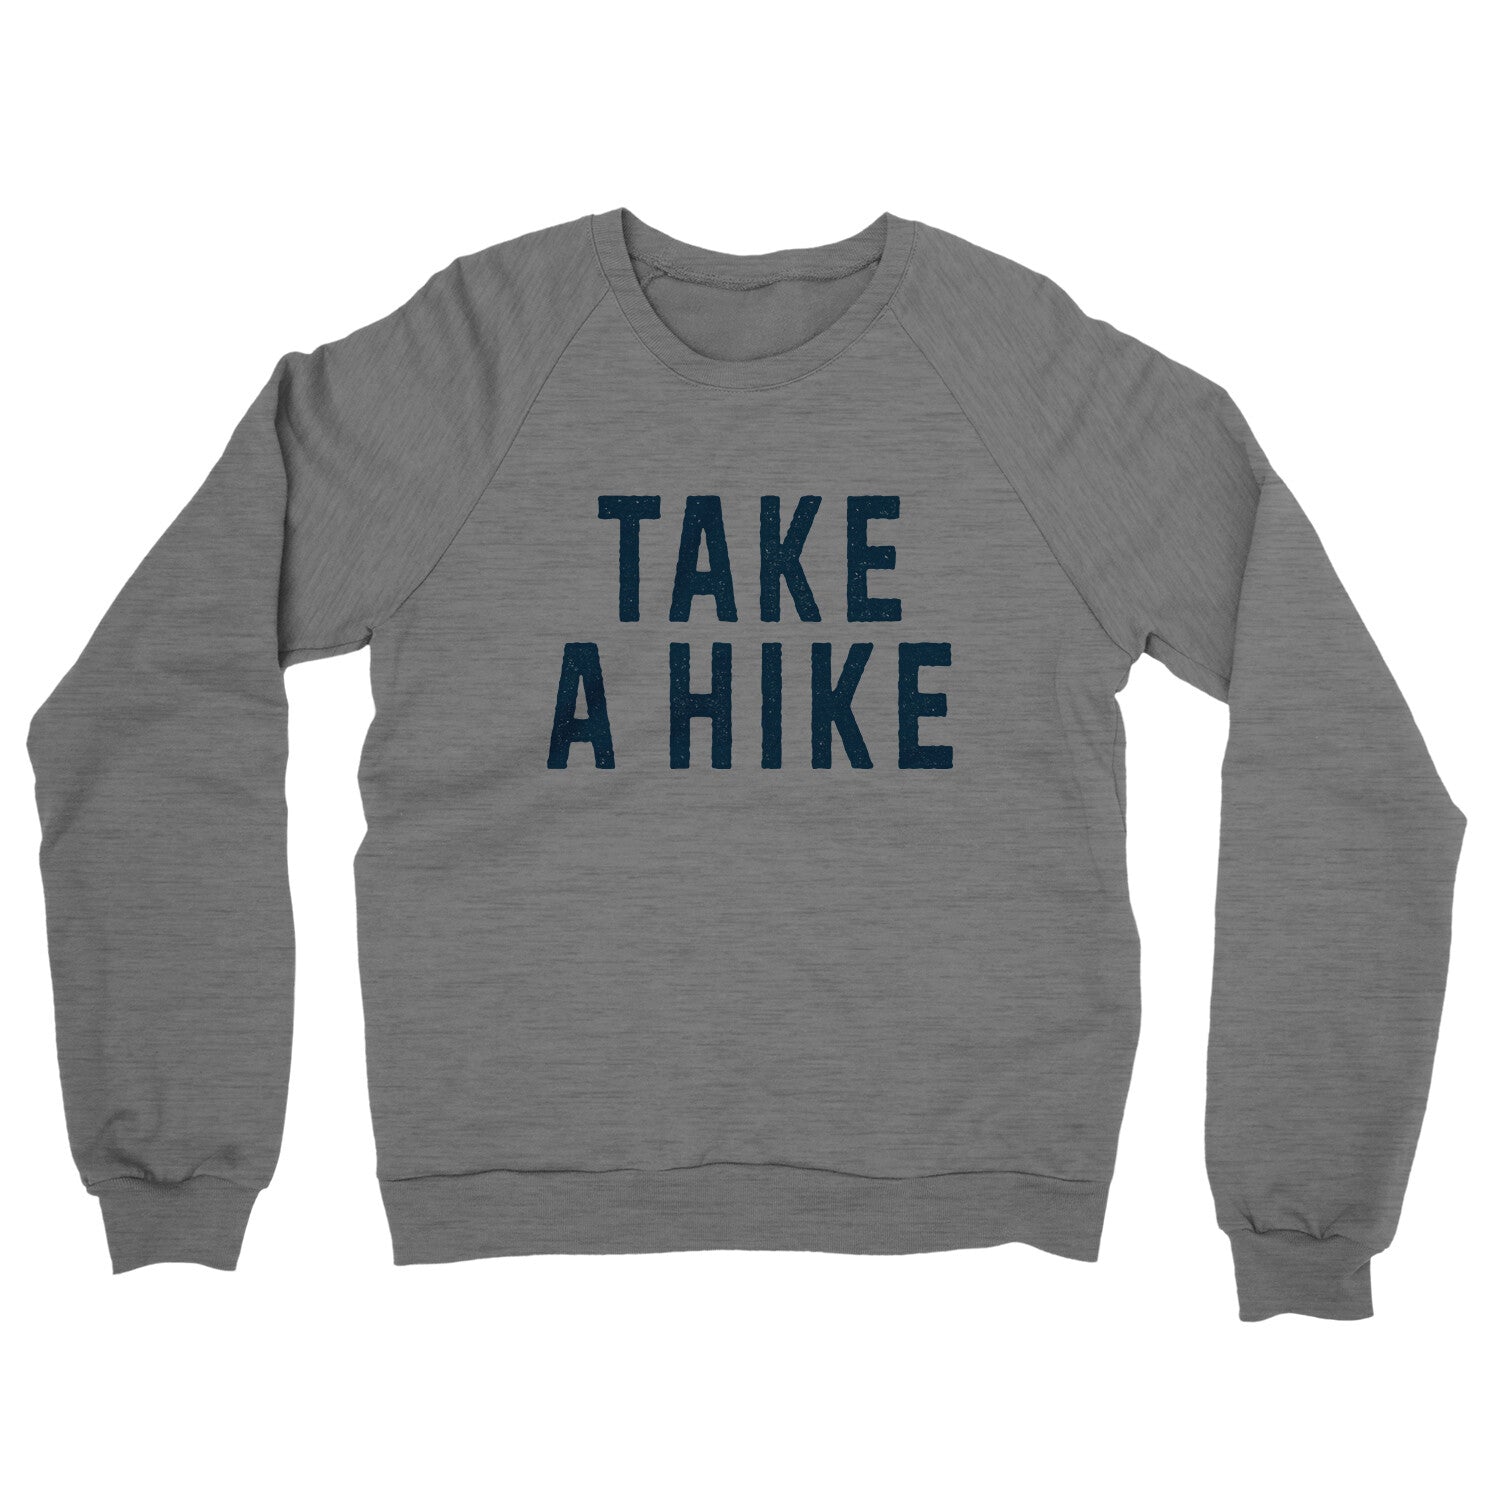 Take a Hike in Graphite Heather Color